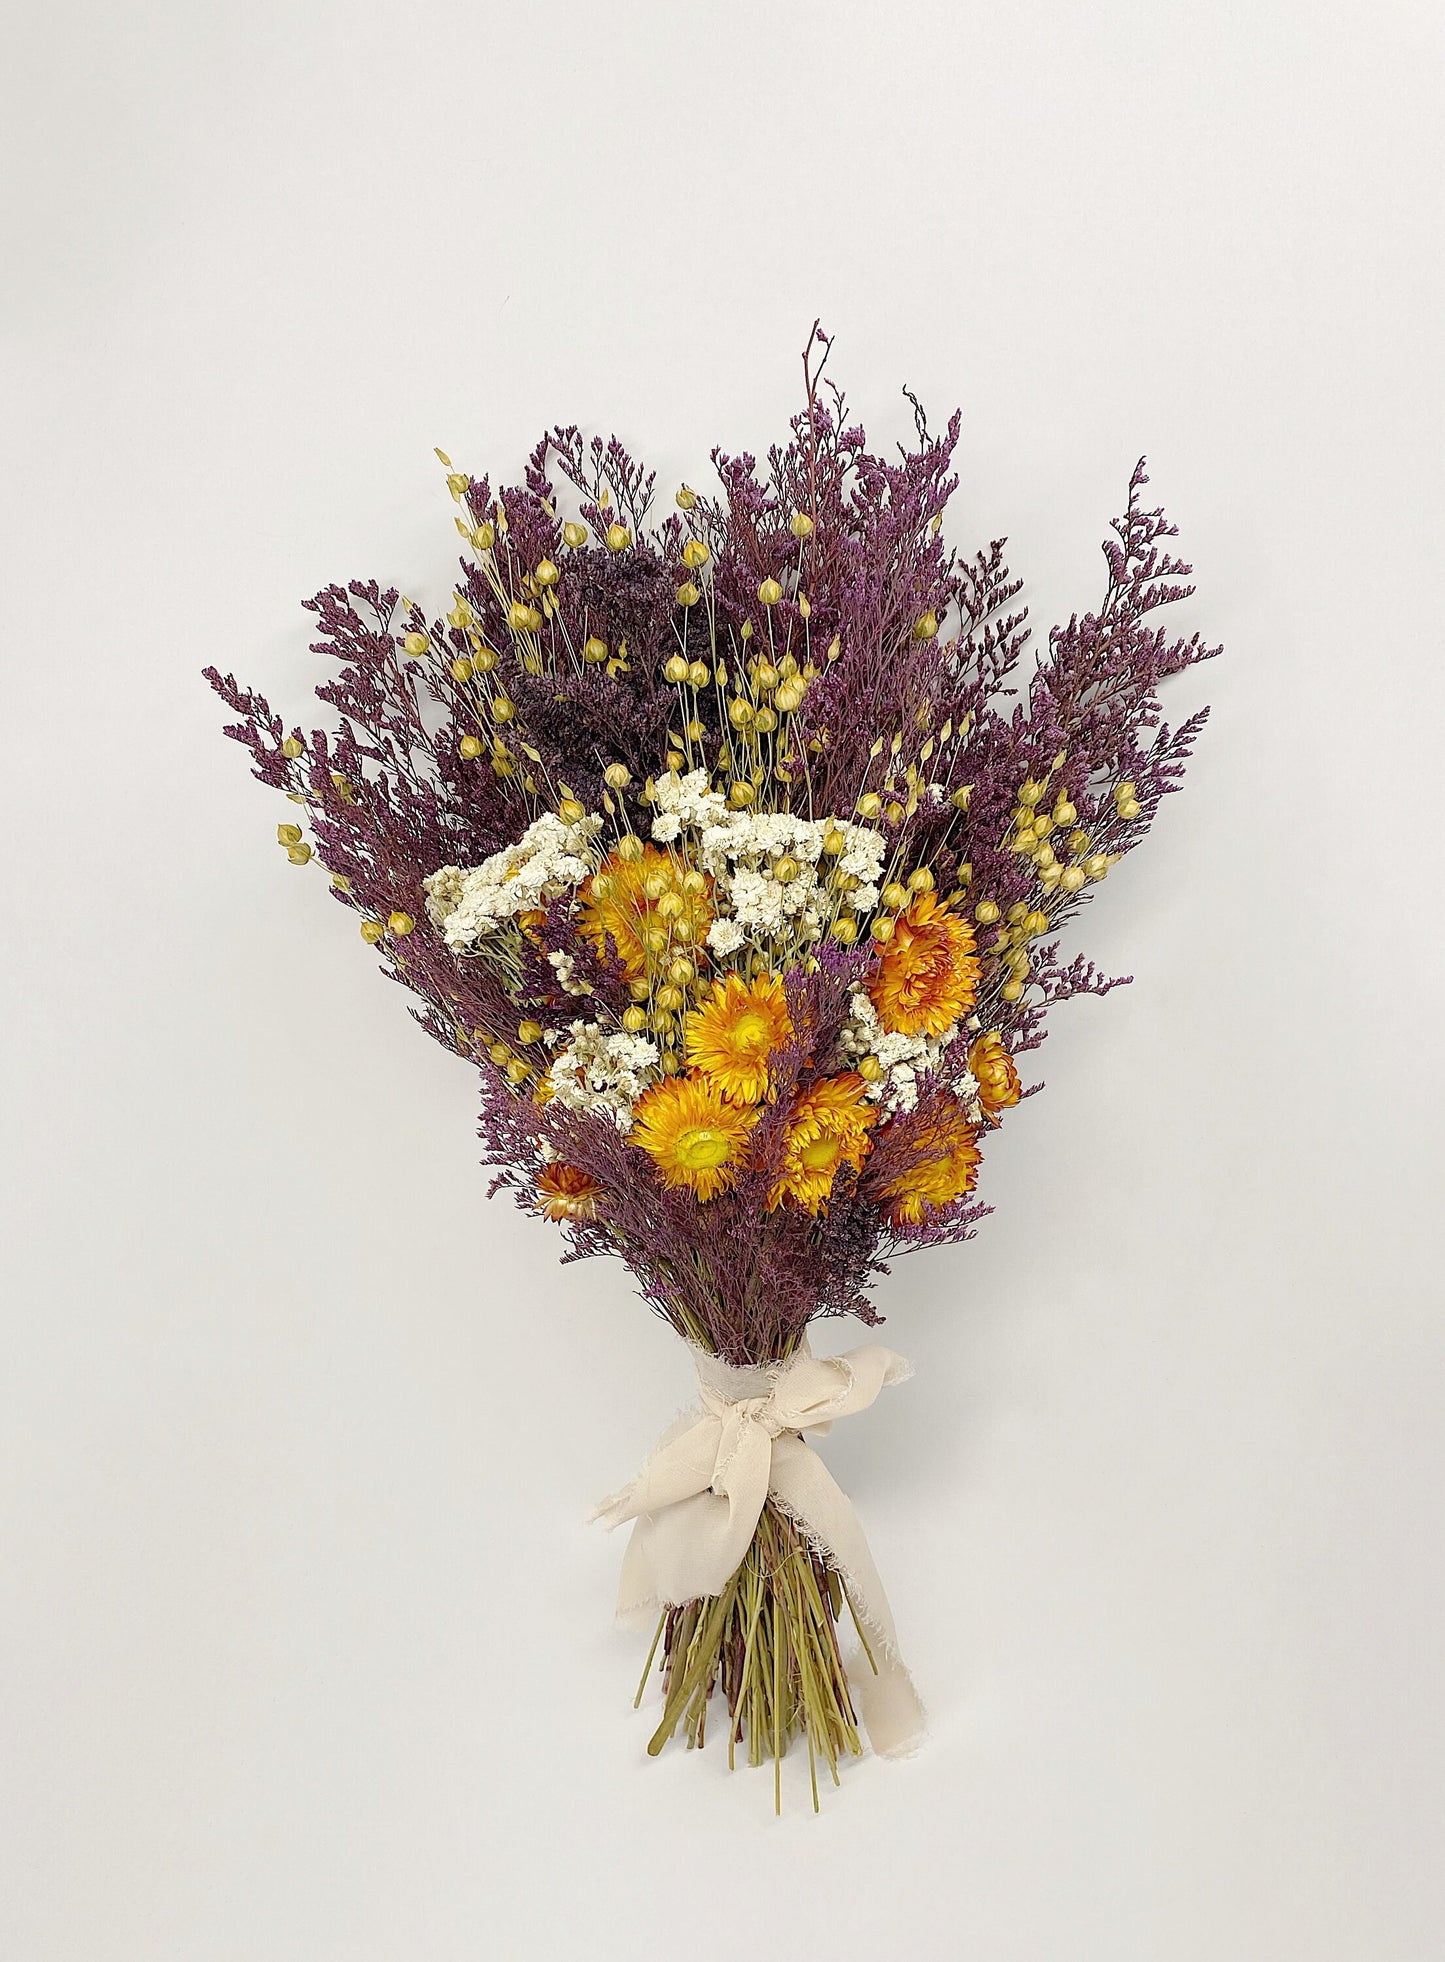 Floral Bouquet, Wedding, Purple and Orange, Dried Flowers, Bridal, Caspia, House Decor, Preserved Flowers, Straw Flowers, Fall